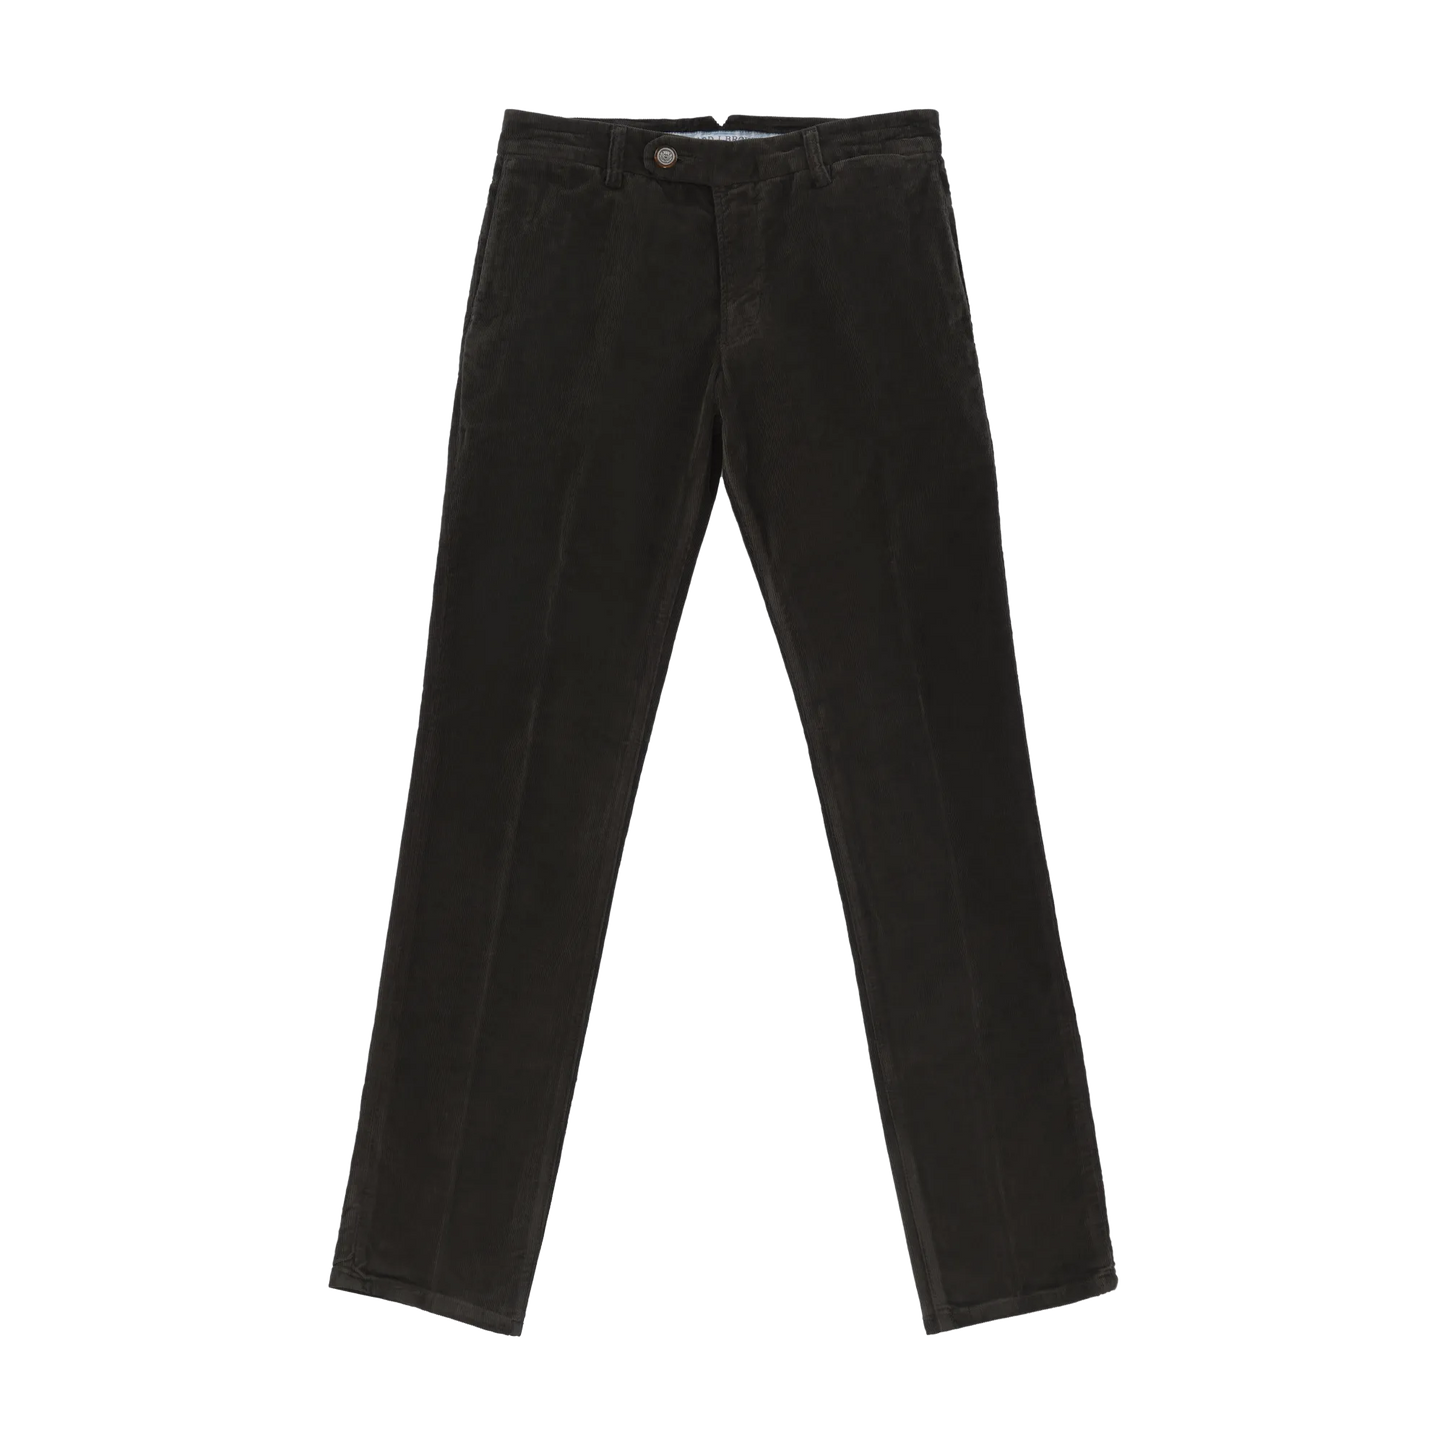 Slim-Fit Stretch-Cotton Velvet Trousers in Greyish Brown